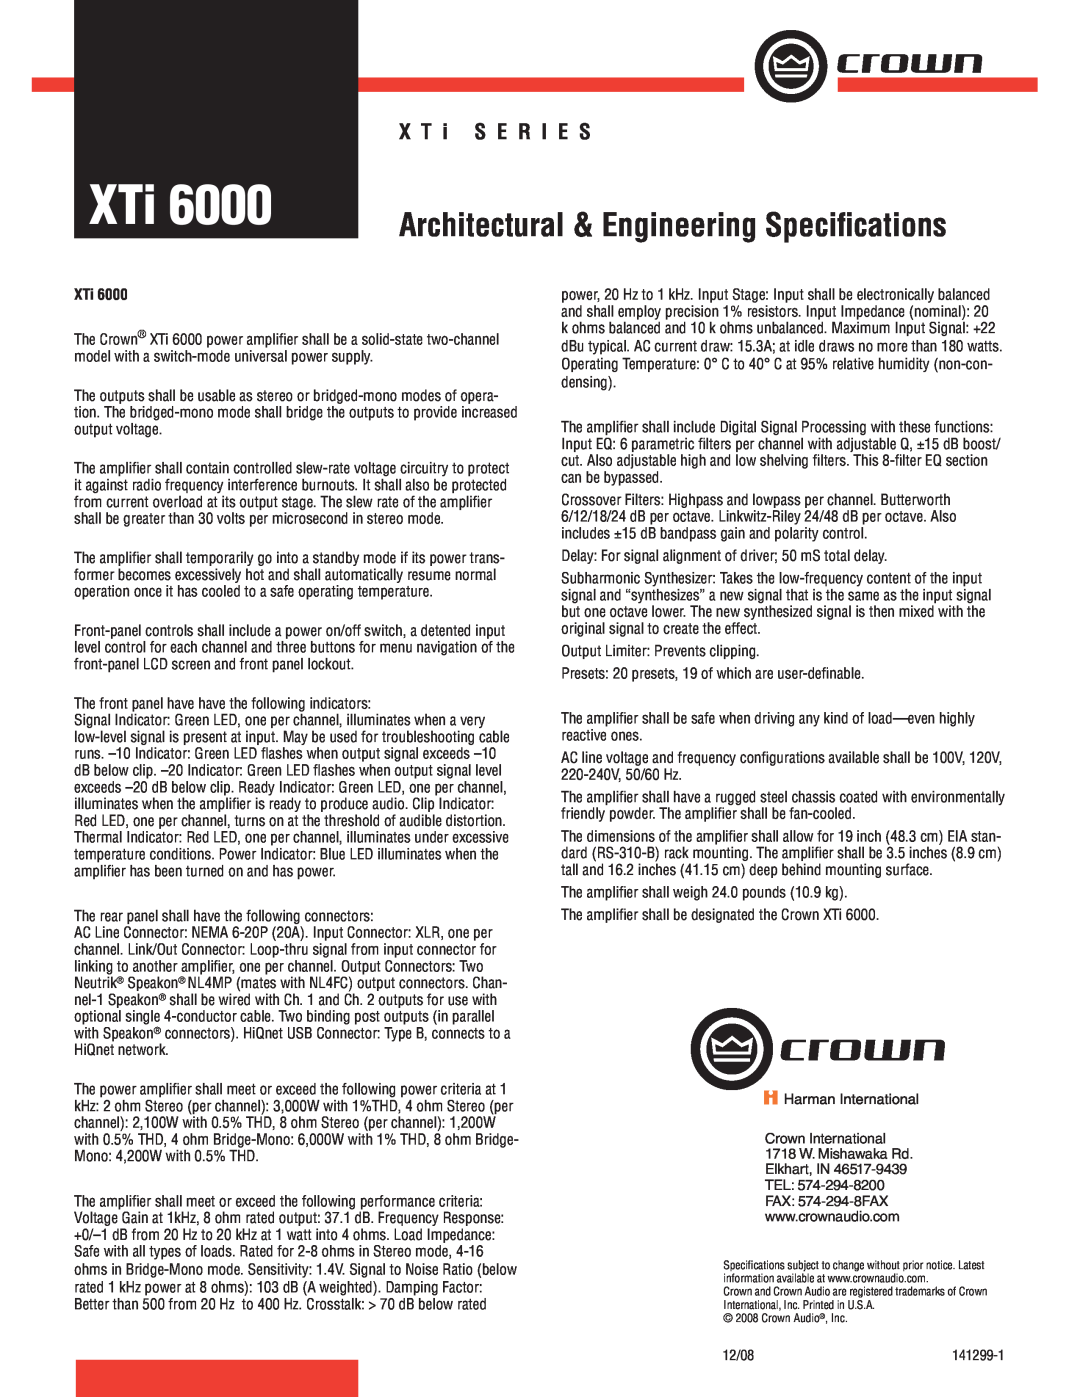 Crown Audio XTi 6000 specifications Architectural & Engineering Speciﬁcations, X T i S E R I E S 